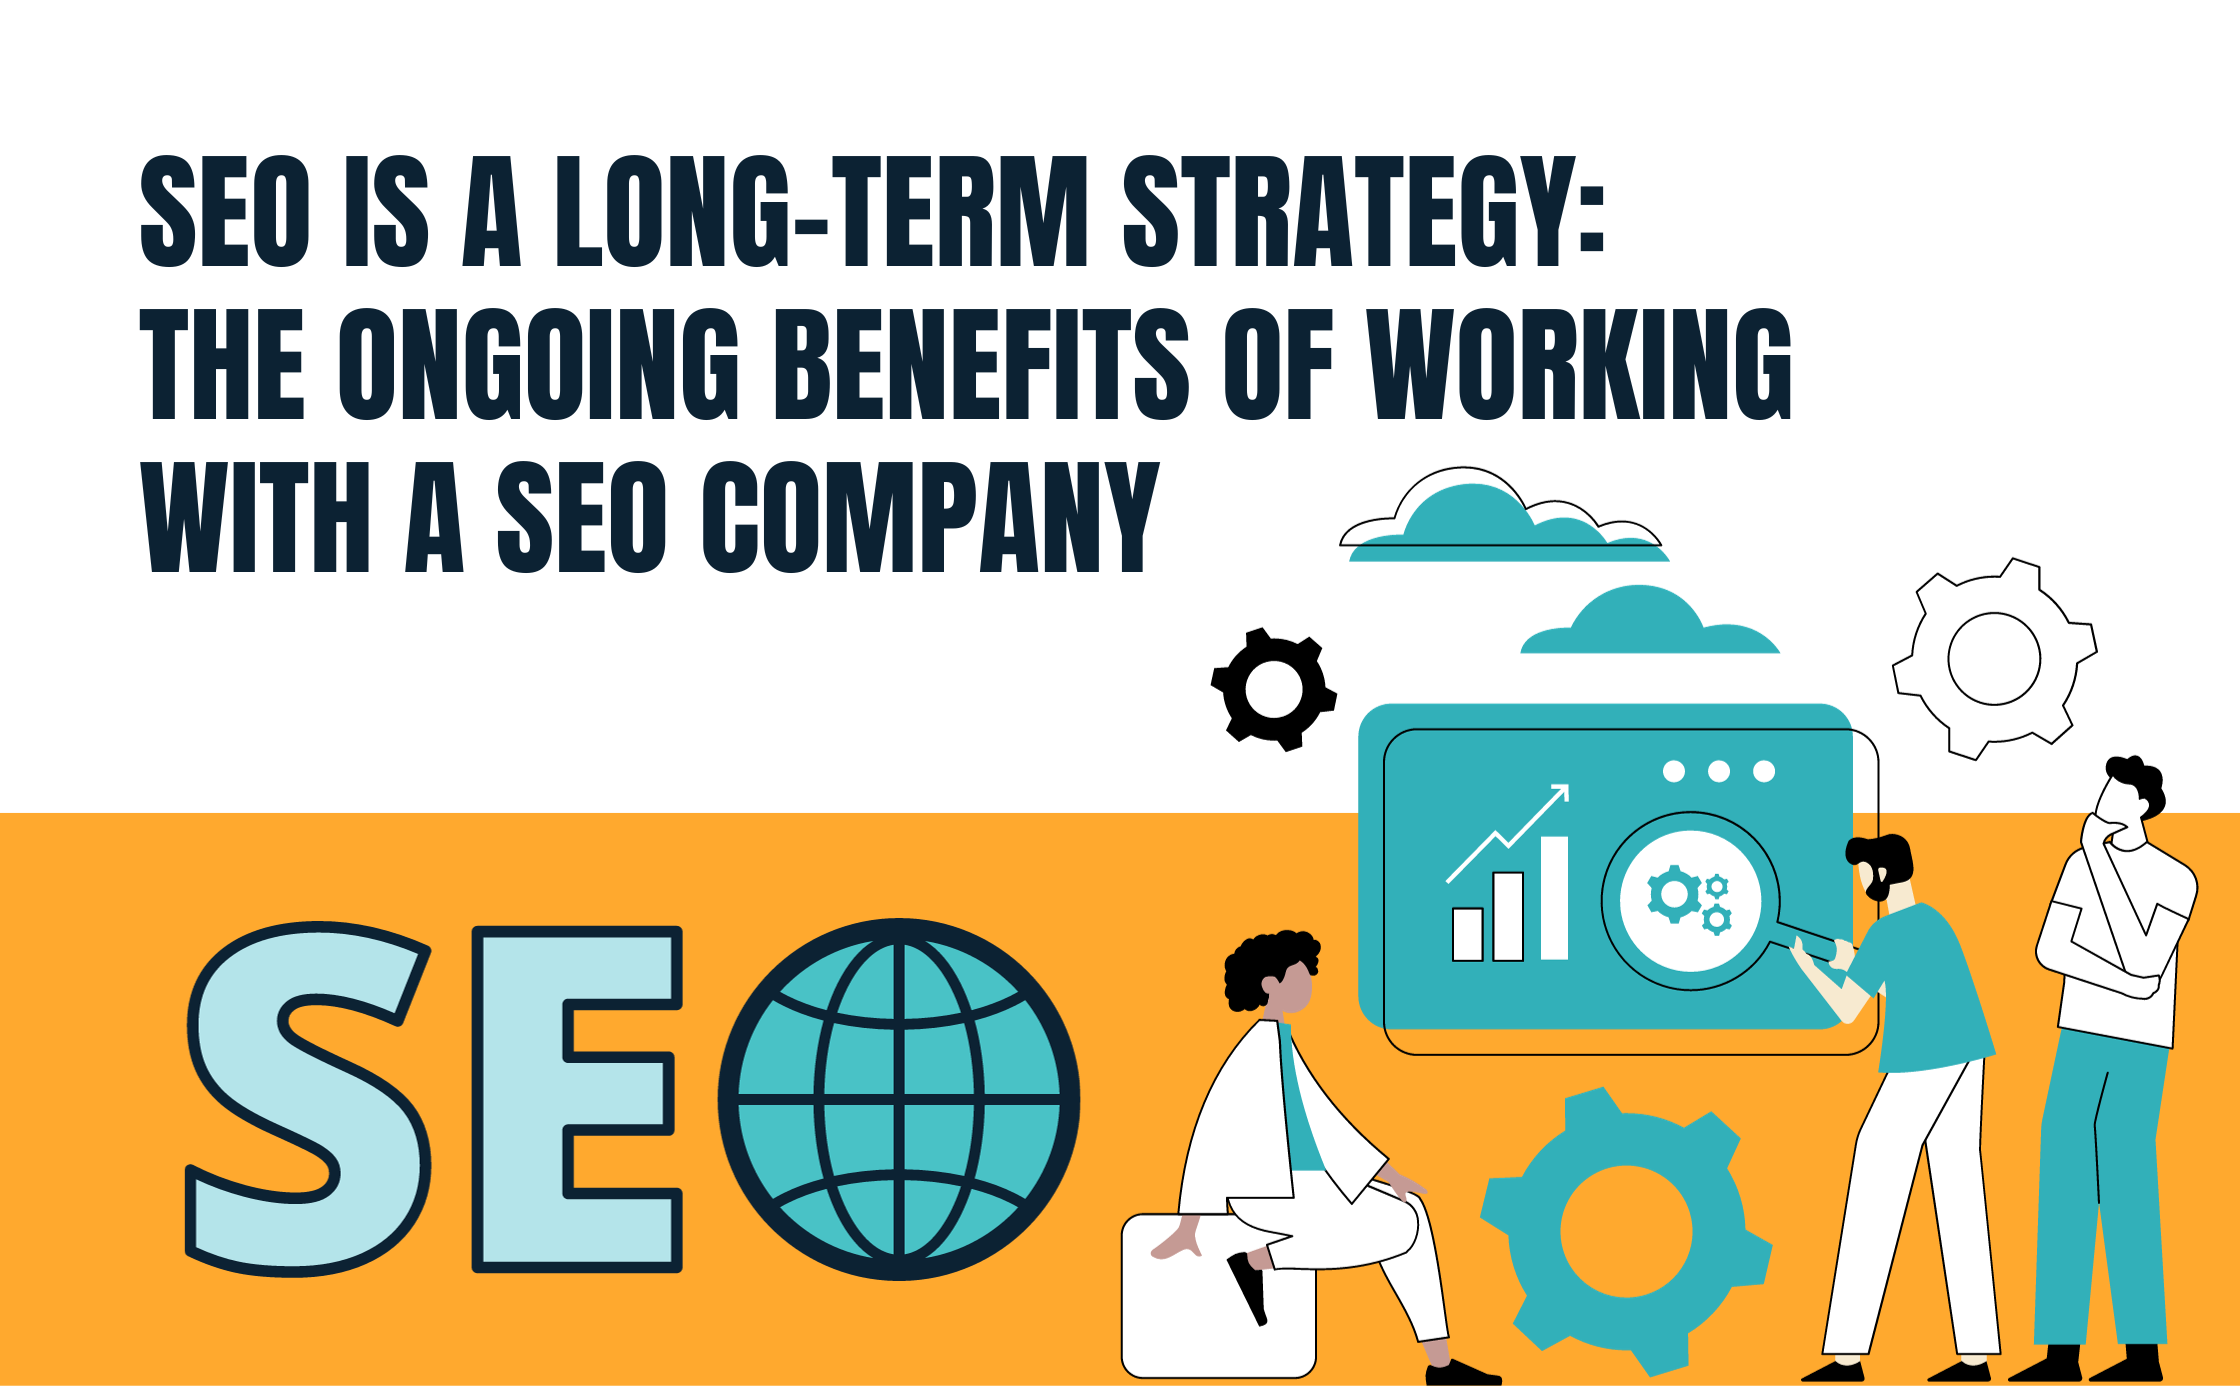 SEO is a Long-Term Strategy: The Ongoing Benefits of Working With an SEO Company